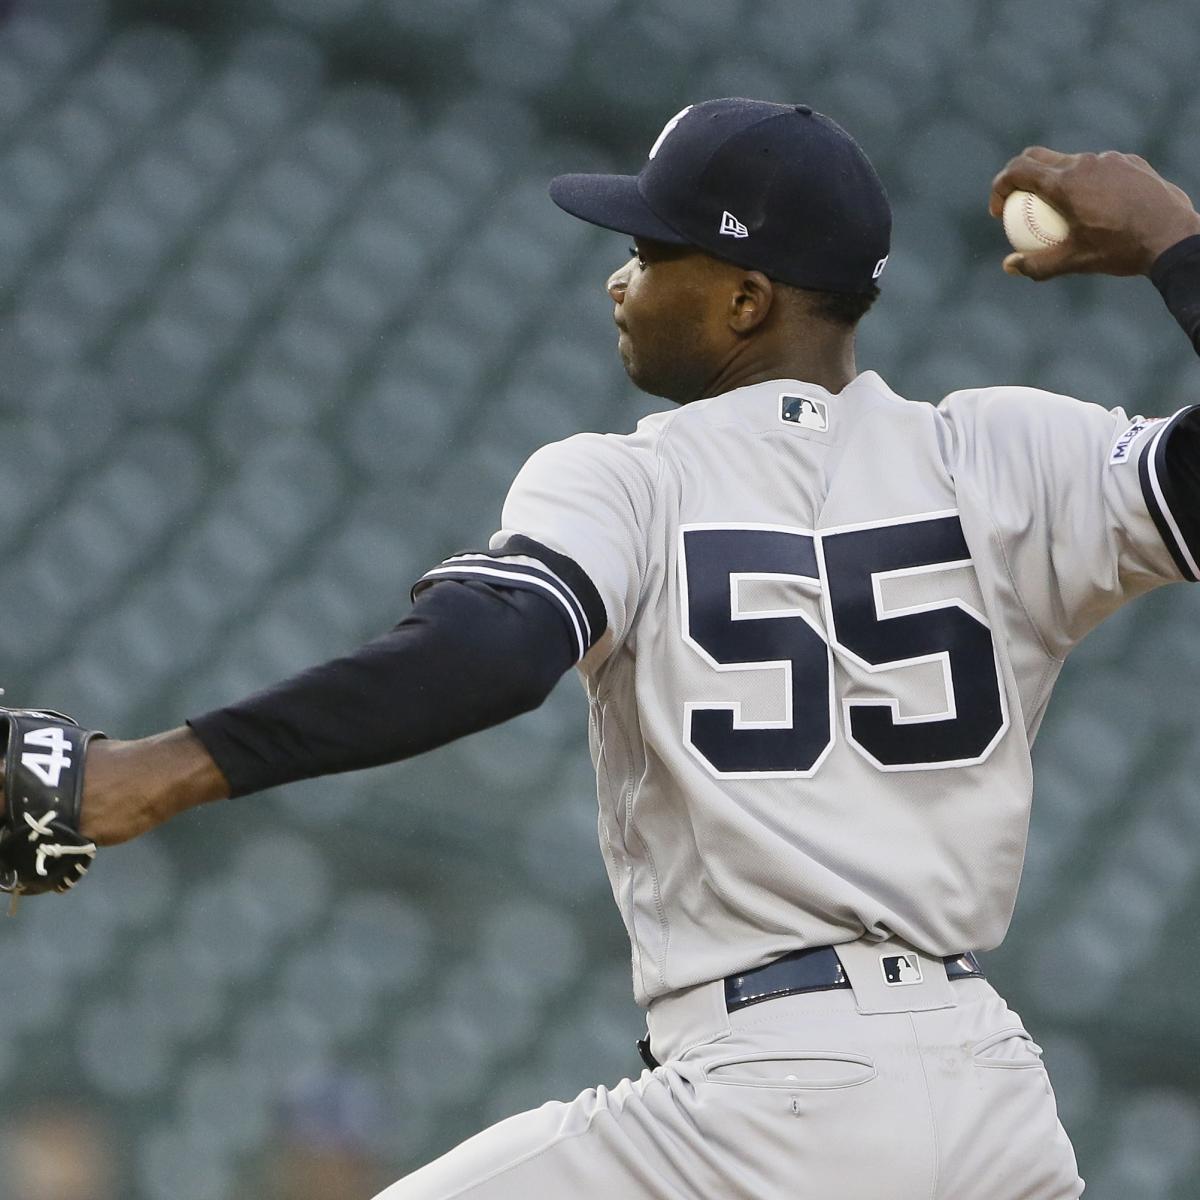 Yankees pitcher Domingo Germán throws 1st perfect game since 2012